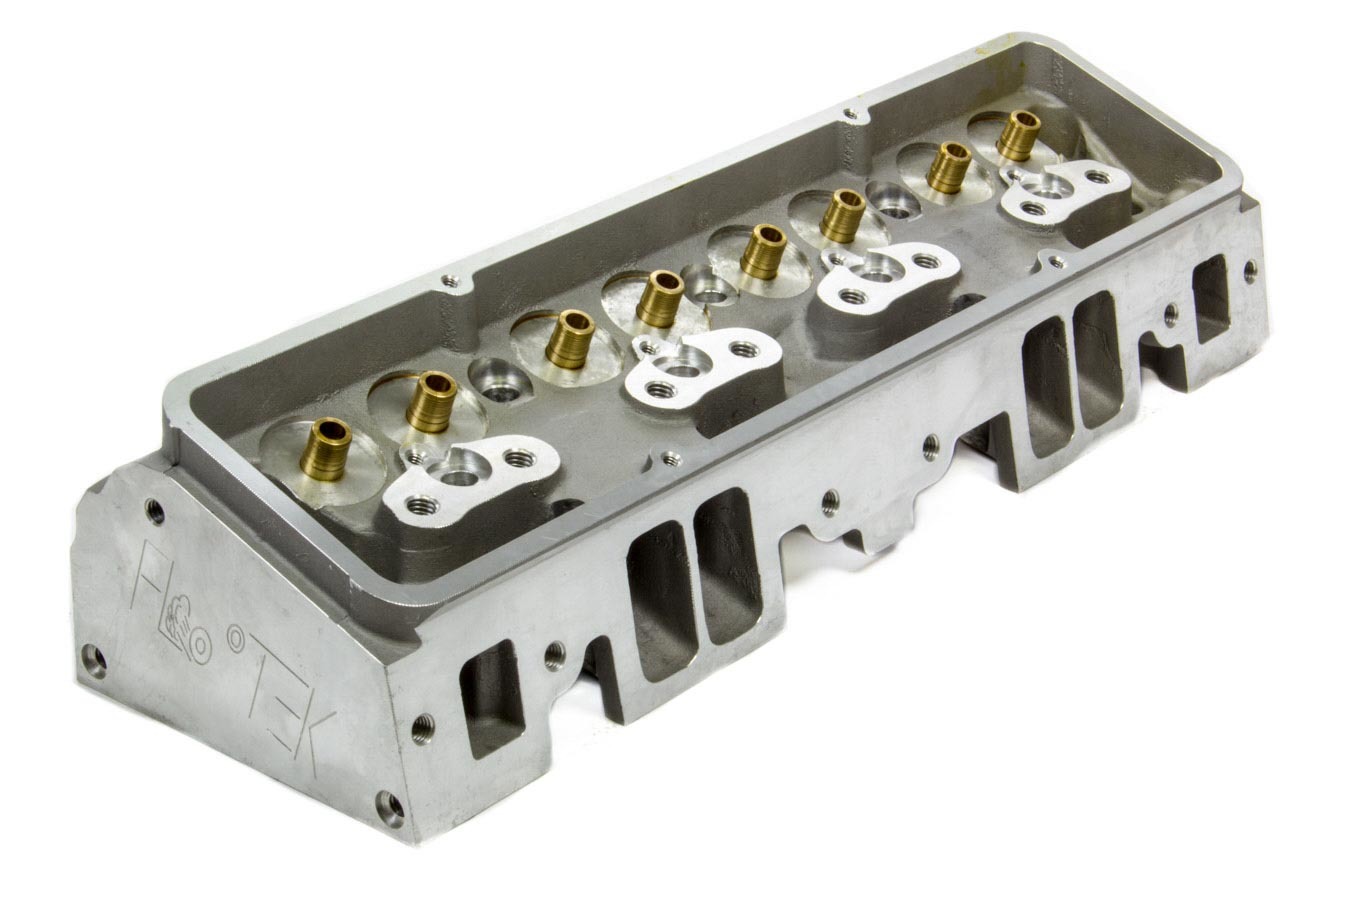 Flo Tek 101500 Cylinder Head, Bare, 2.020 / 1.600 in Valves, 180 cc Intake, 64 cc Chamber, Angle Plug, Aluminum, Small Block Chevy, Each